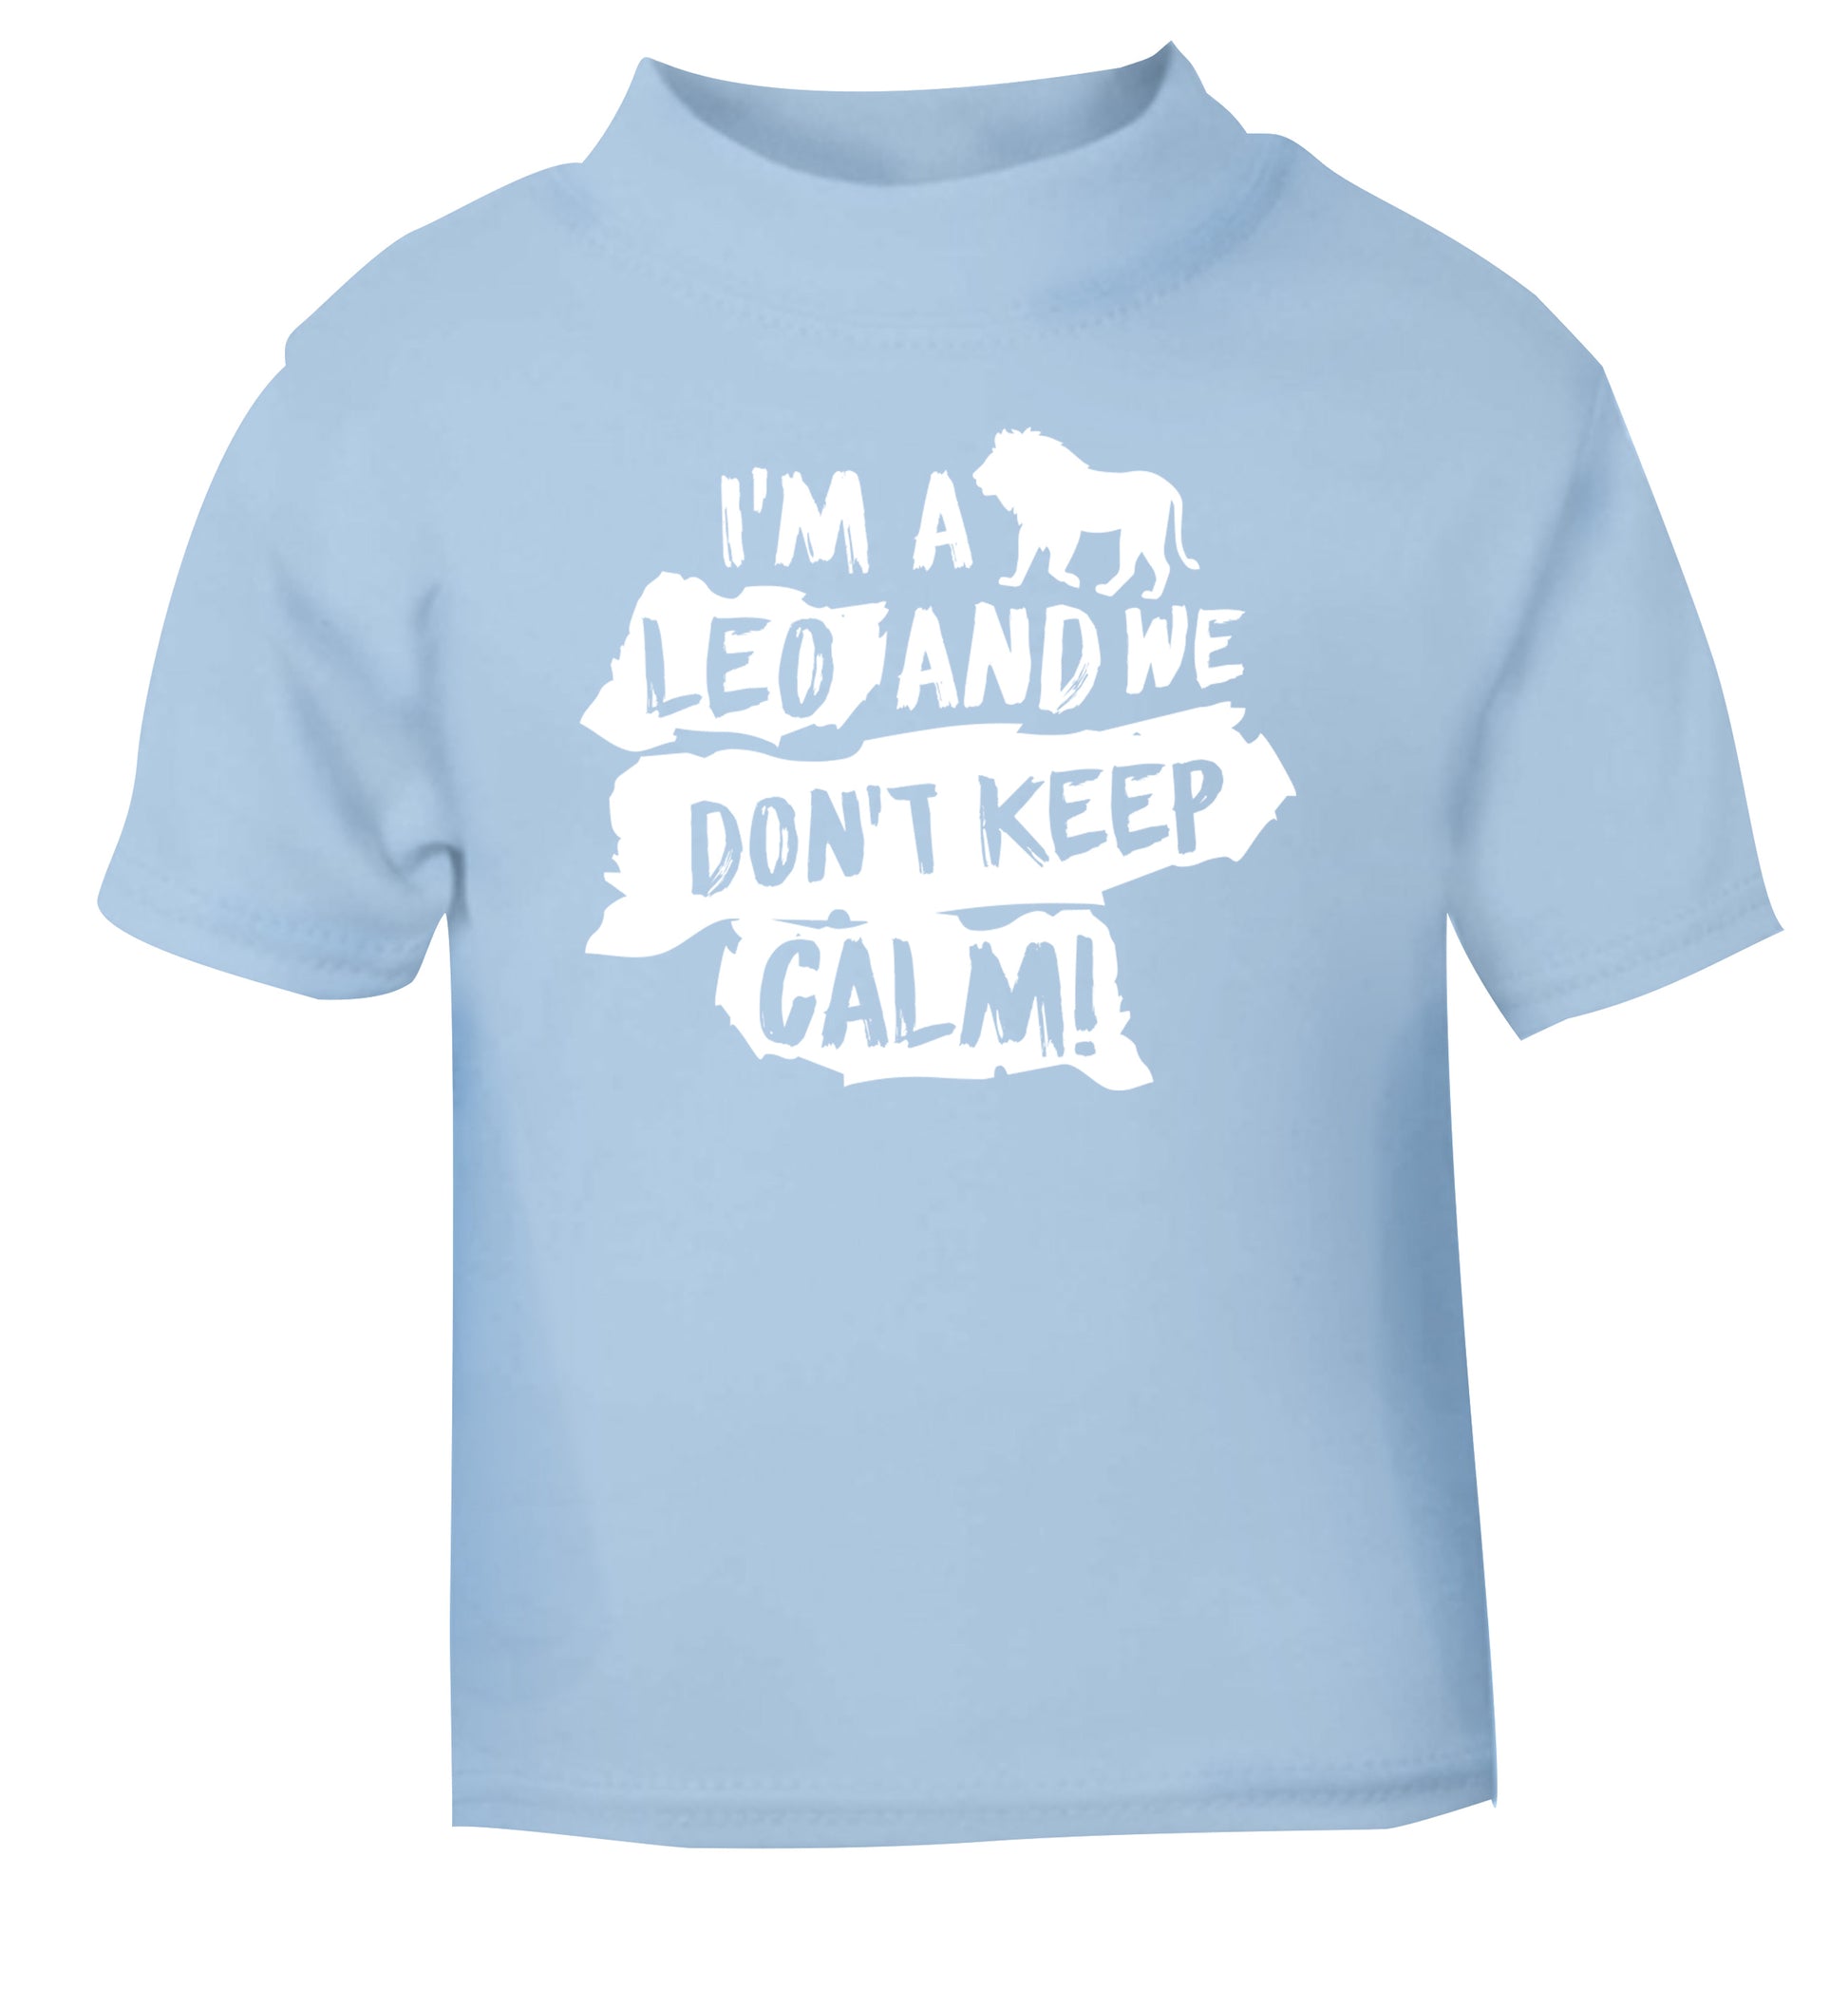 I'm a leo and we don't keep calm! light blue Baby Toddler Tshirt 2 Years